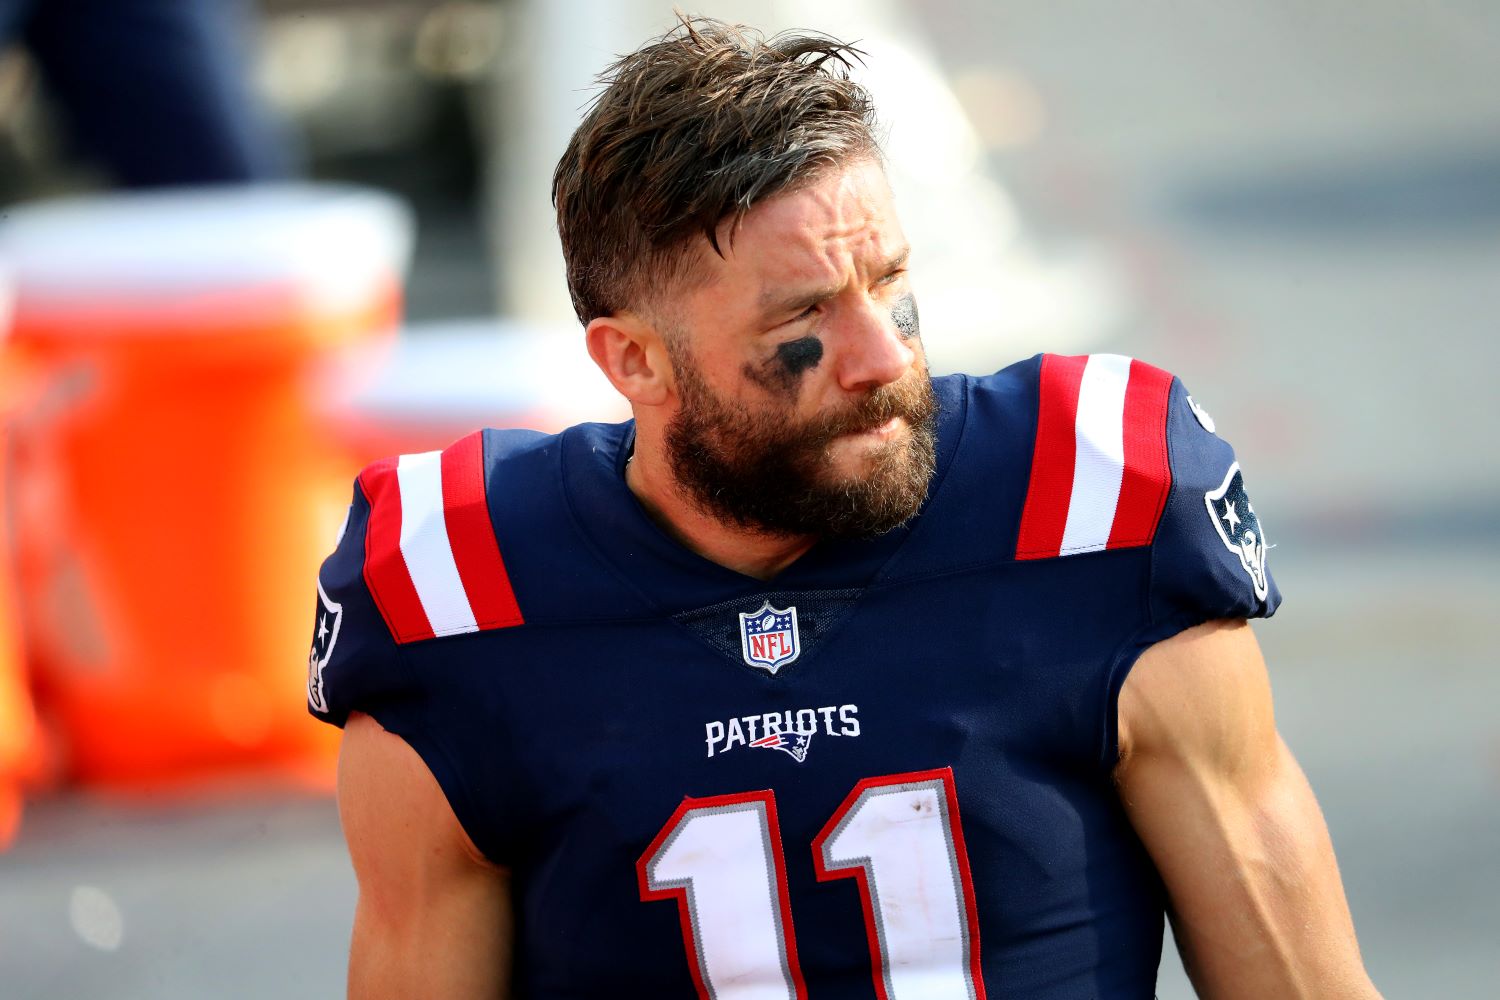 Julian Edelman has caught his final pass for the Patriots based on his injury history and contract situation.